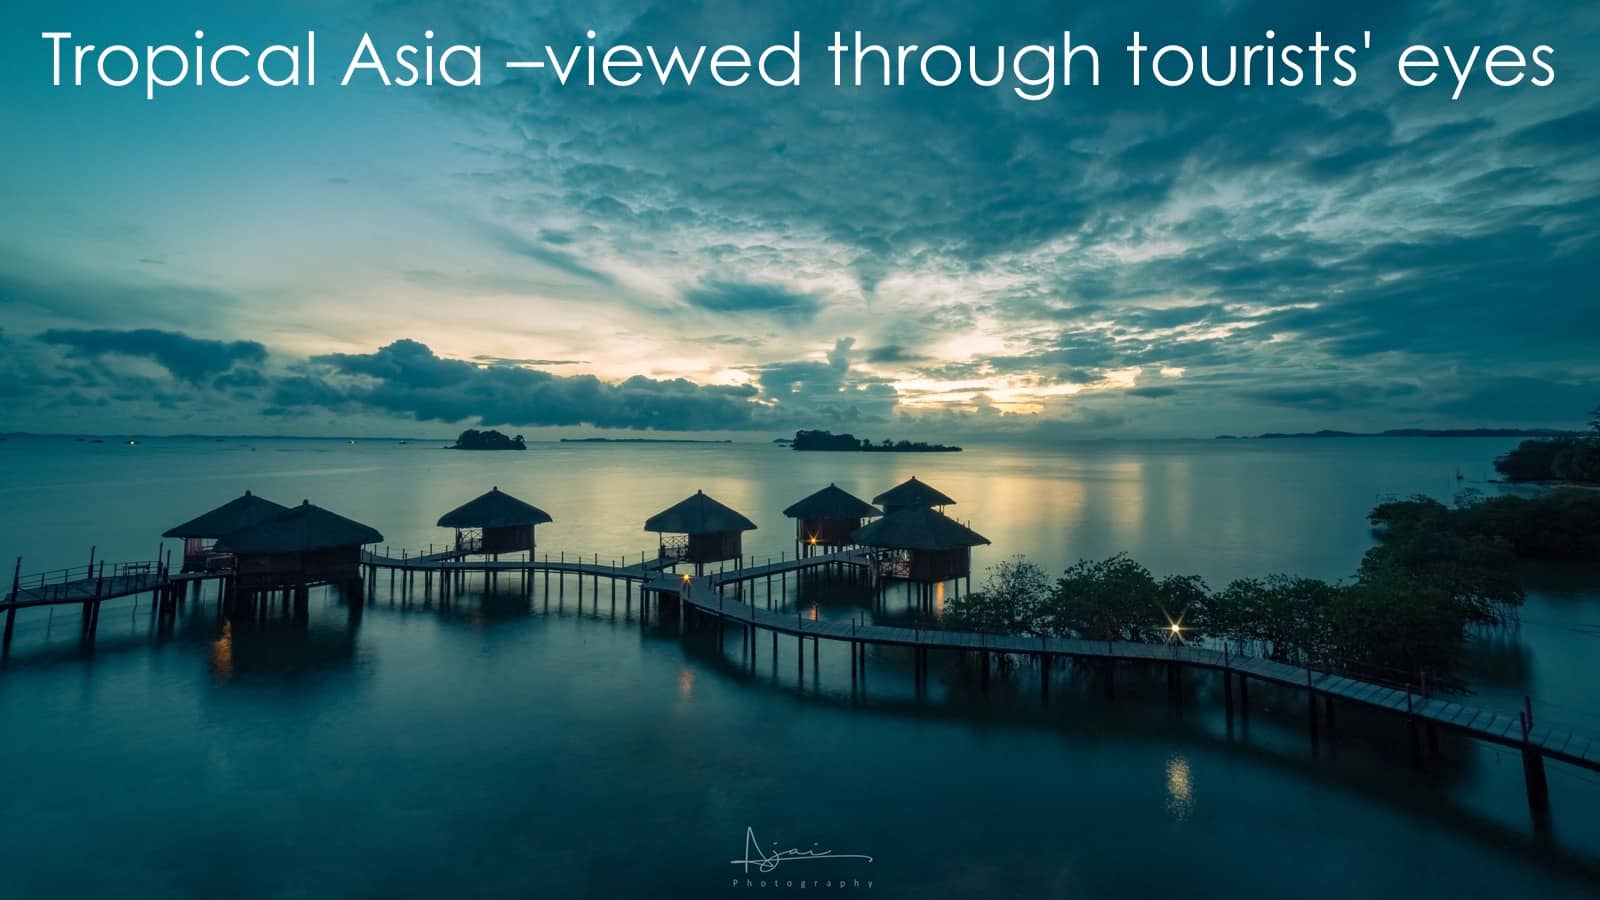 Tropical Asia viewed through tourists' eyes